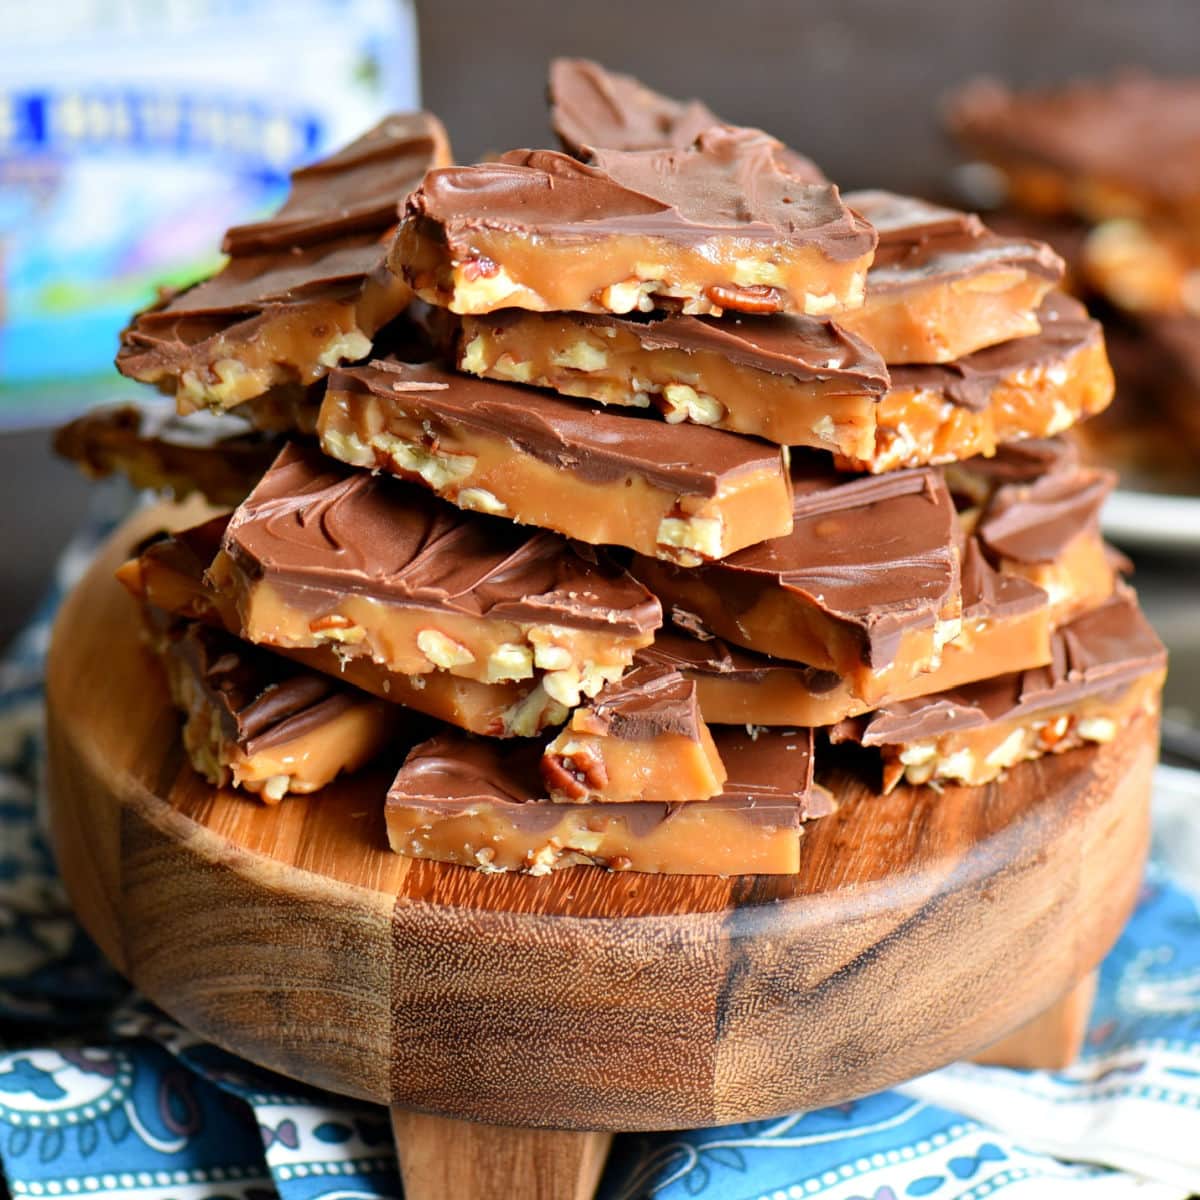 20 Easy Chocolate Candy Recipes - Insanely Good